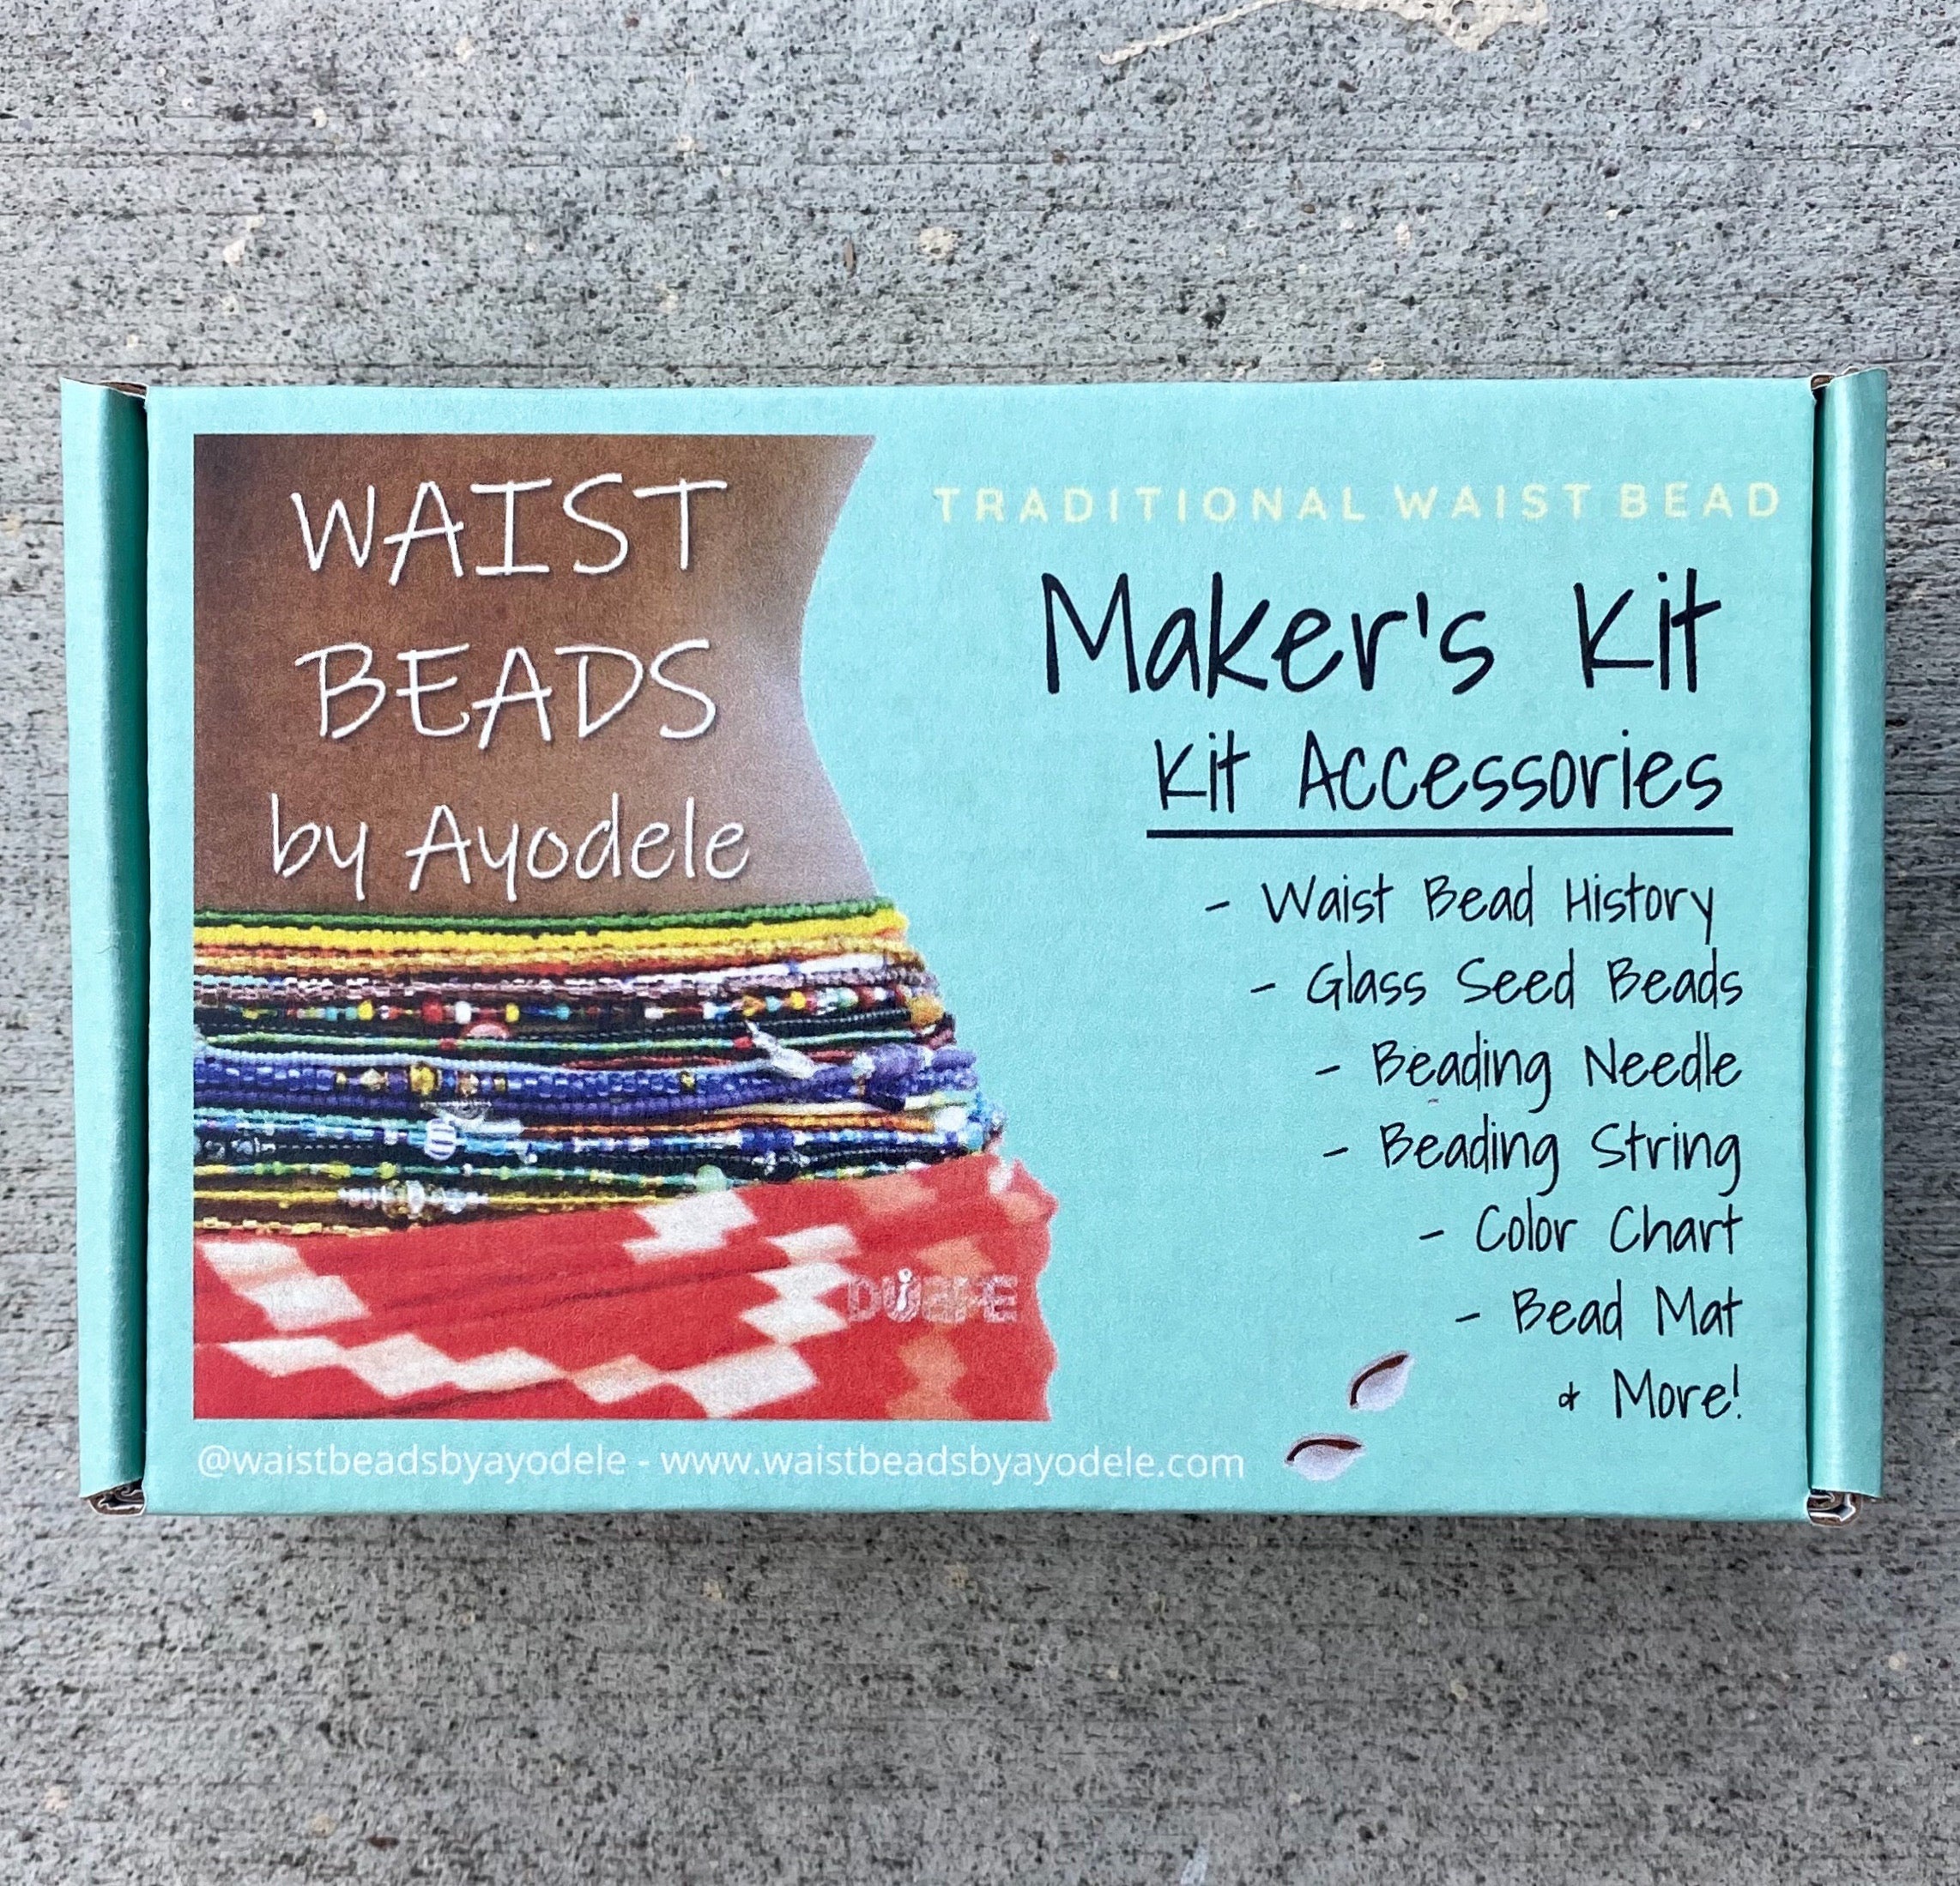 Waist Bead Making Kit, Exclusively From BeadKraft (Each)